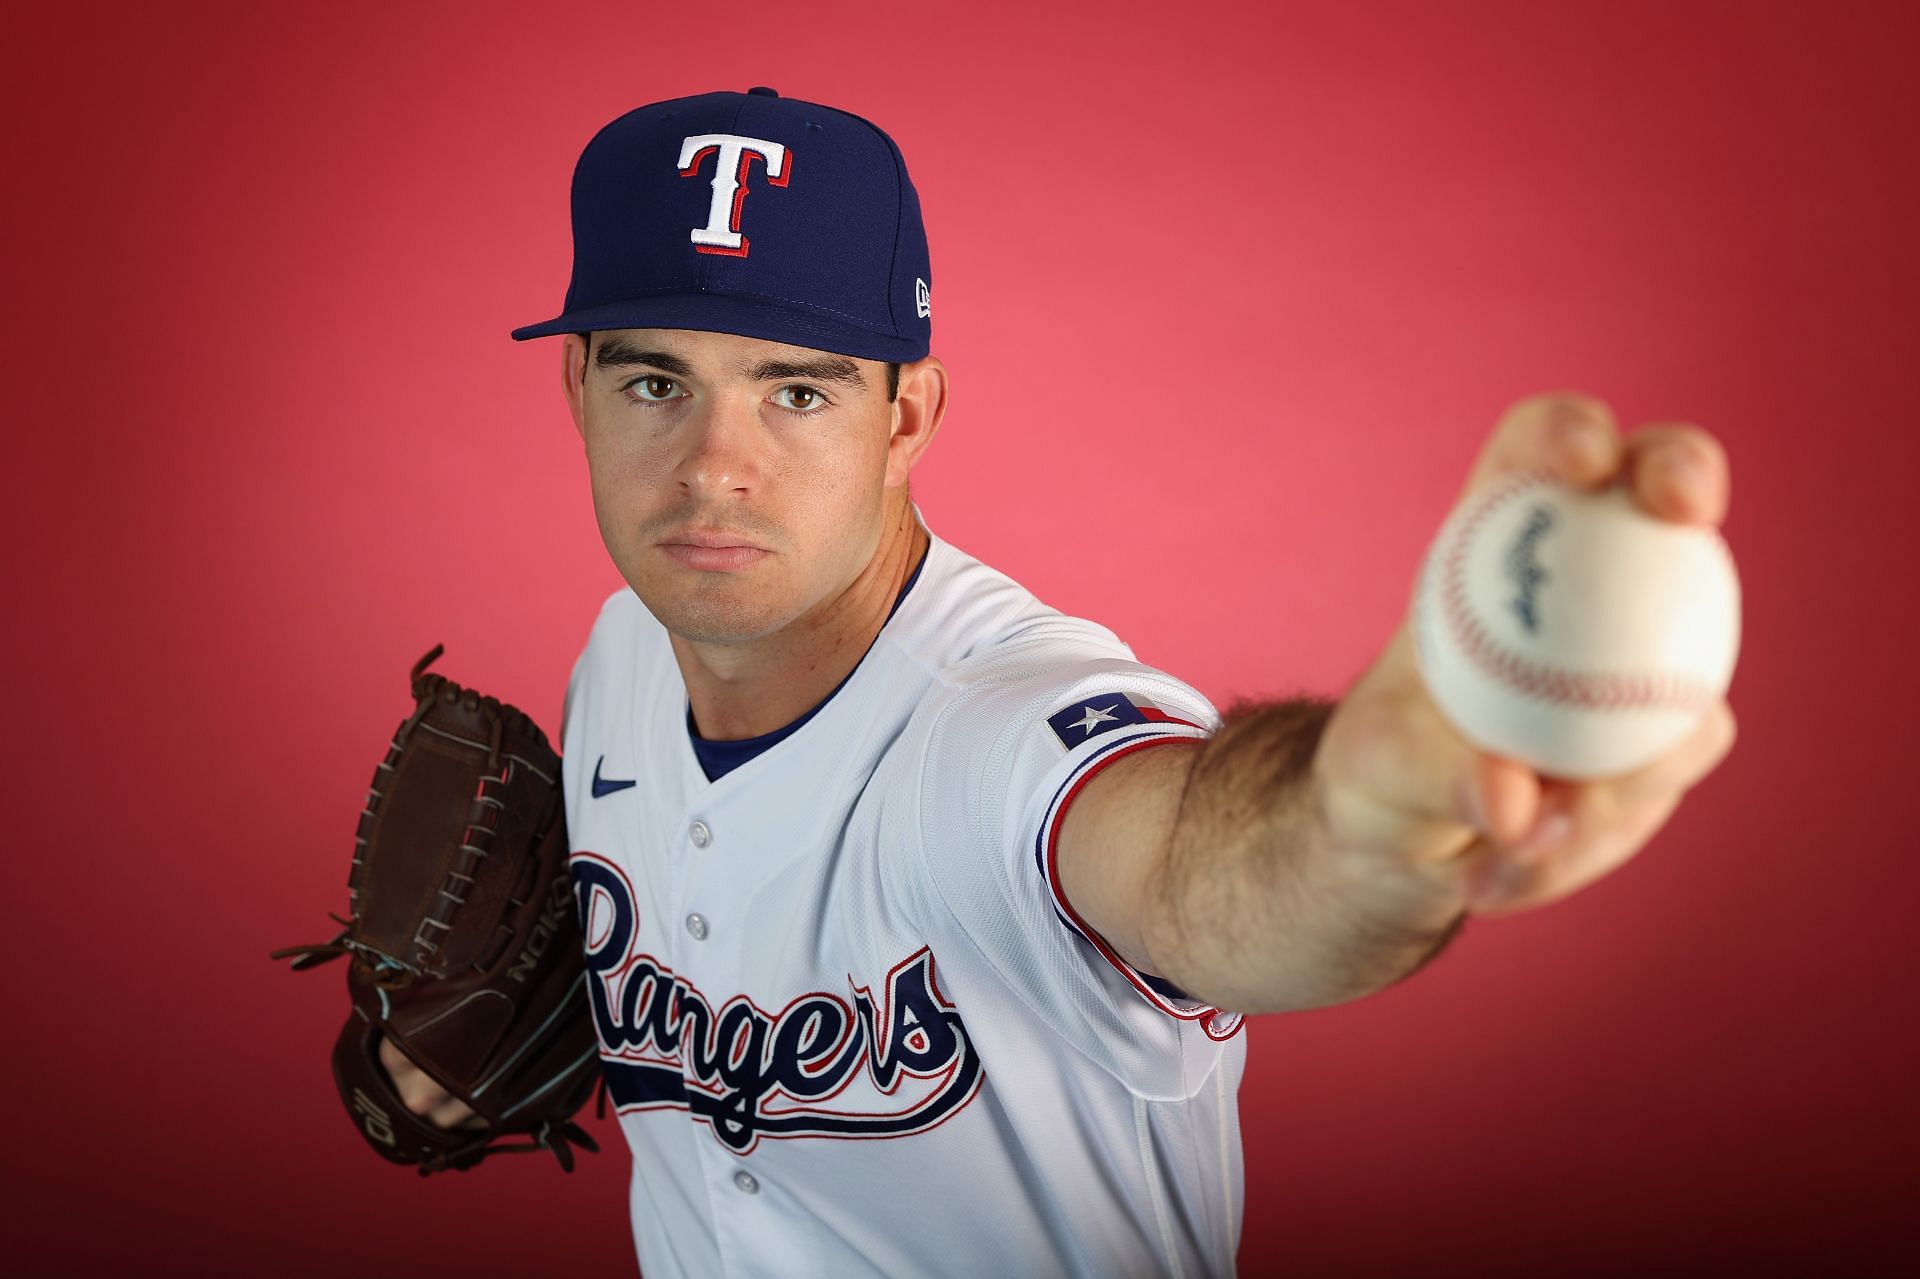 Texas Rangers Photo Day SURPRISE, ARIZONA - FEBRUARY 21: Pitcher Cody Bradford #91 of the Texas Rangers poses for a portrait during media day at Surprise Stadium on February 21, 2023 in Surprise, Arizona. (Photo by Christian Petersen/Getty Images)